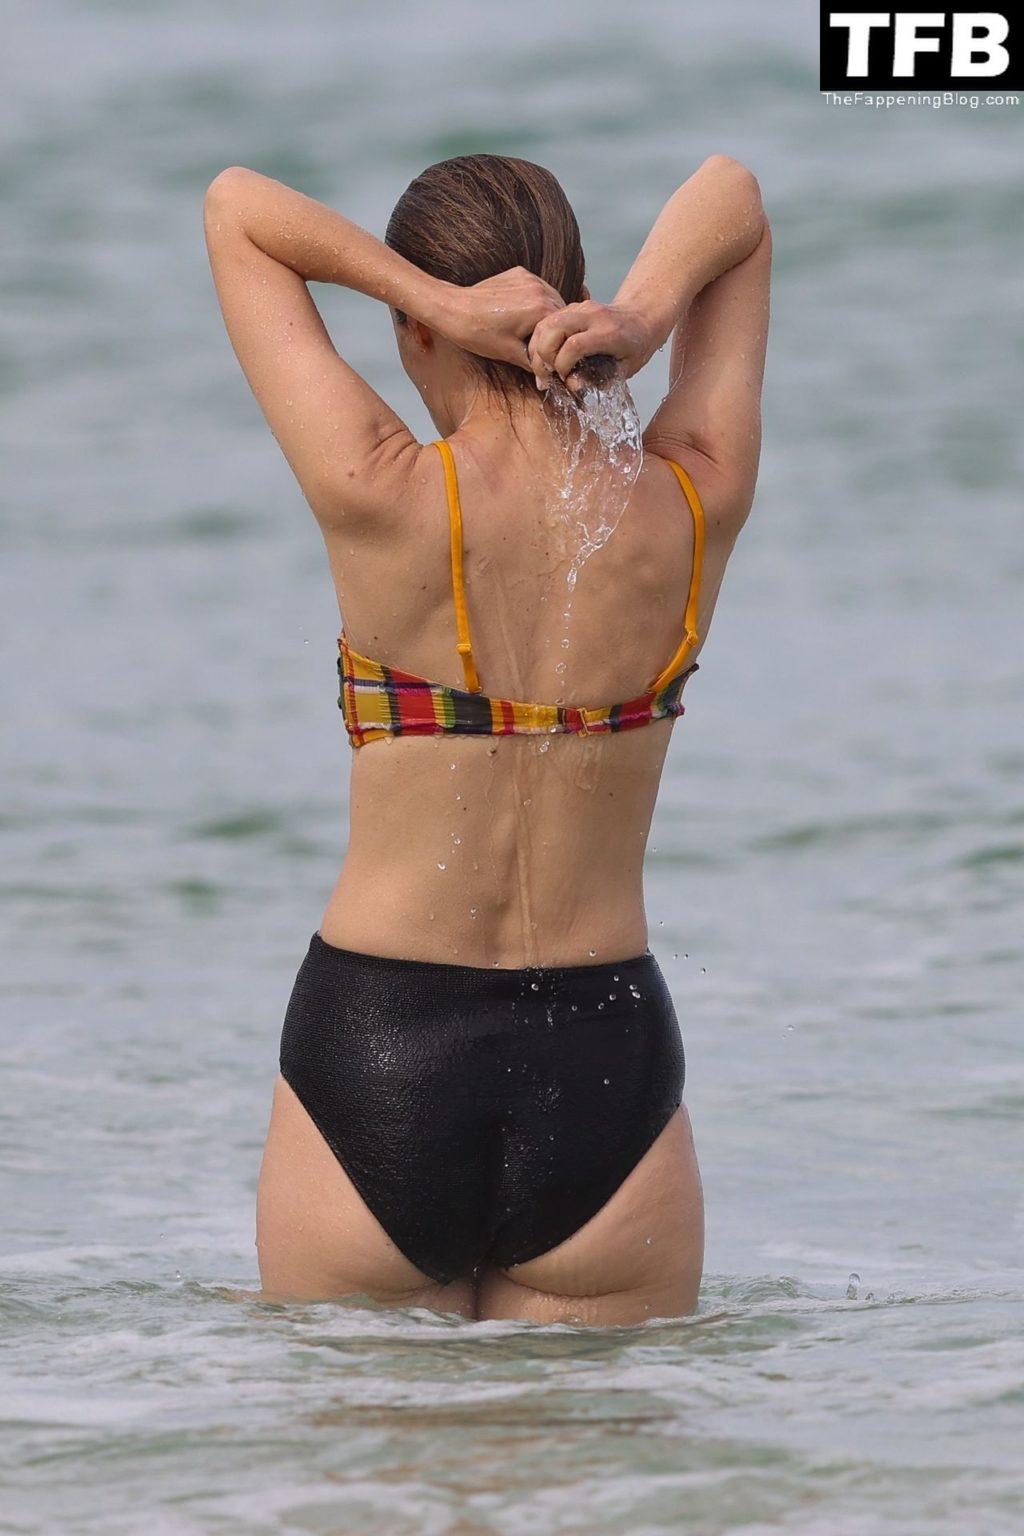 Rose Byrne Sexy The Fappening Blog 22 1024x1536 - Rose Byrne & Kick Gurry Enjoy a Day on the Beach in Sydney (90 Photos)